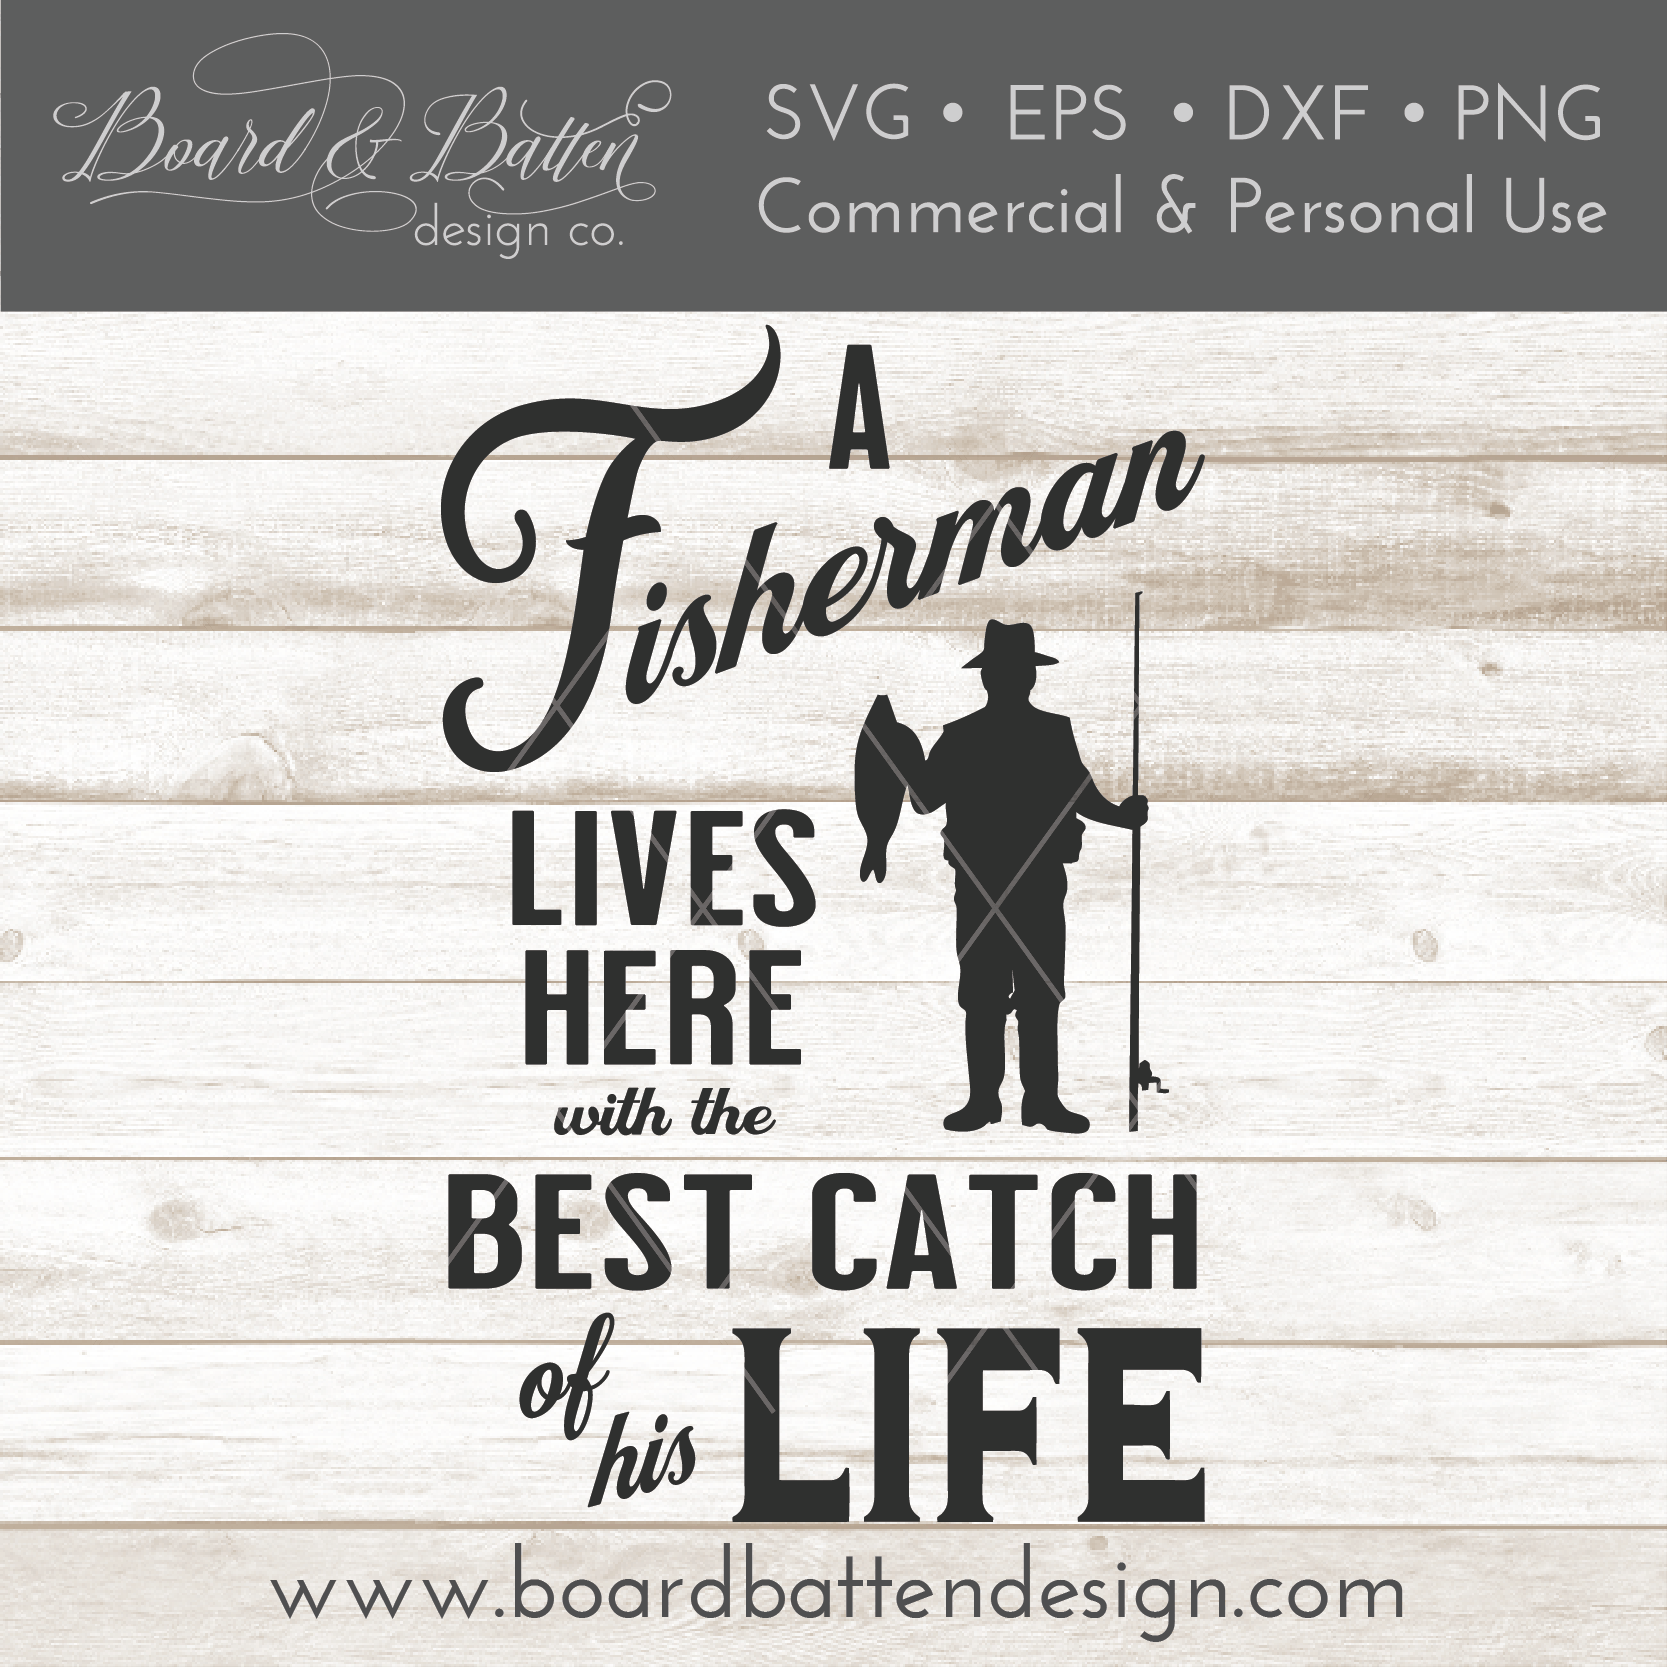 A Fisherman Lives Here With The Best Catch Of His Life SVG File for Fishing - Commercial Use SVG Files for Cricut & Silhouette